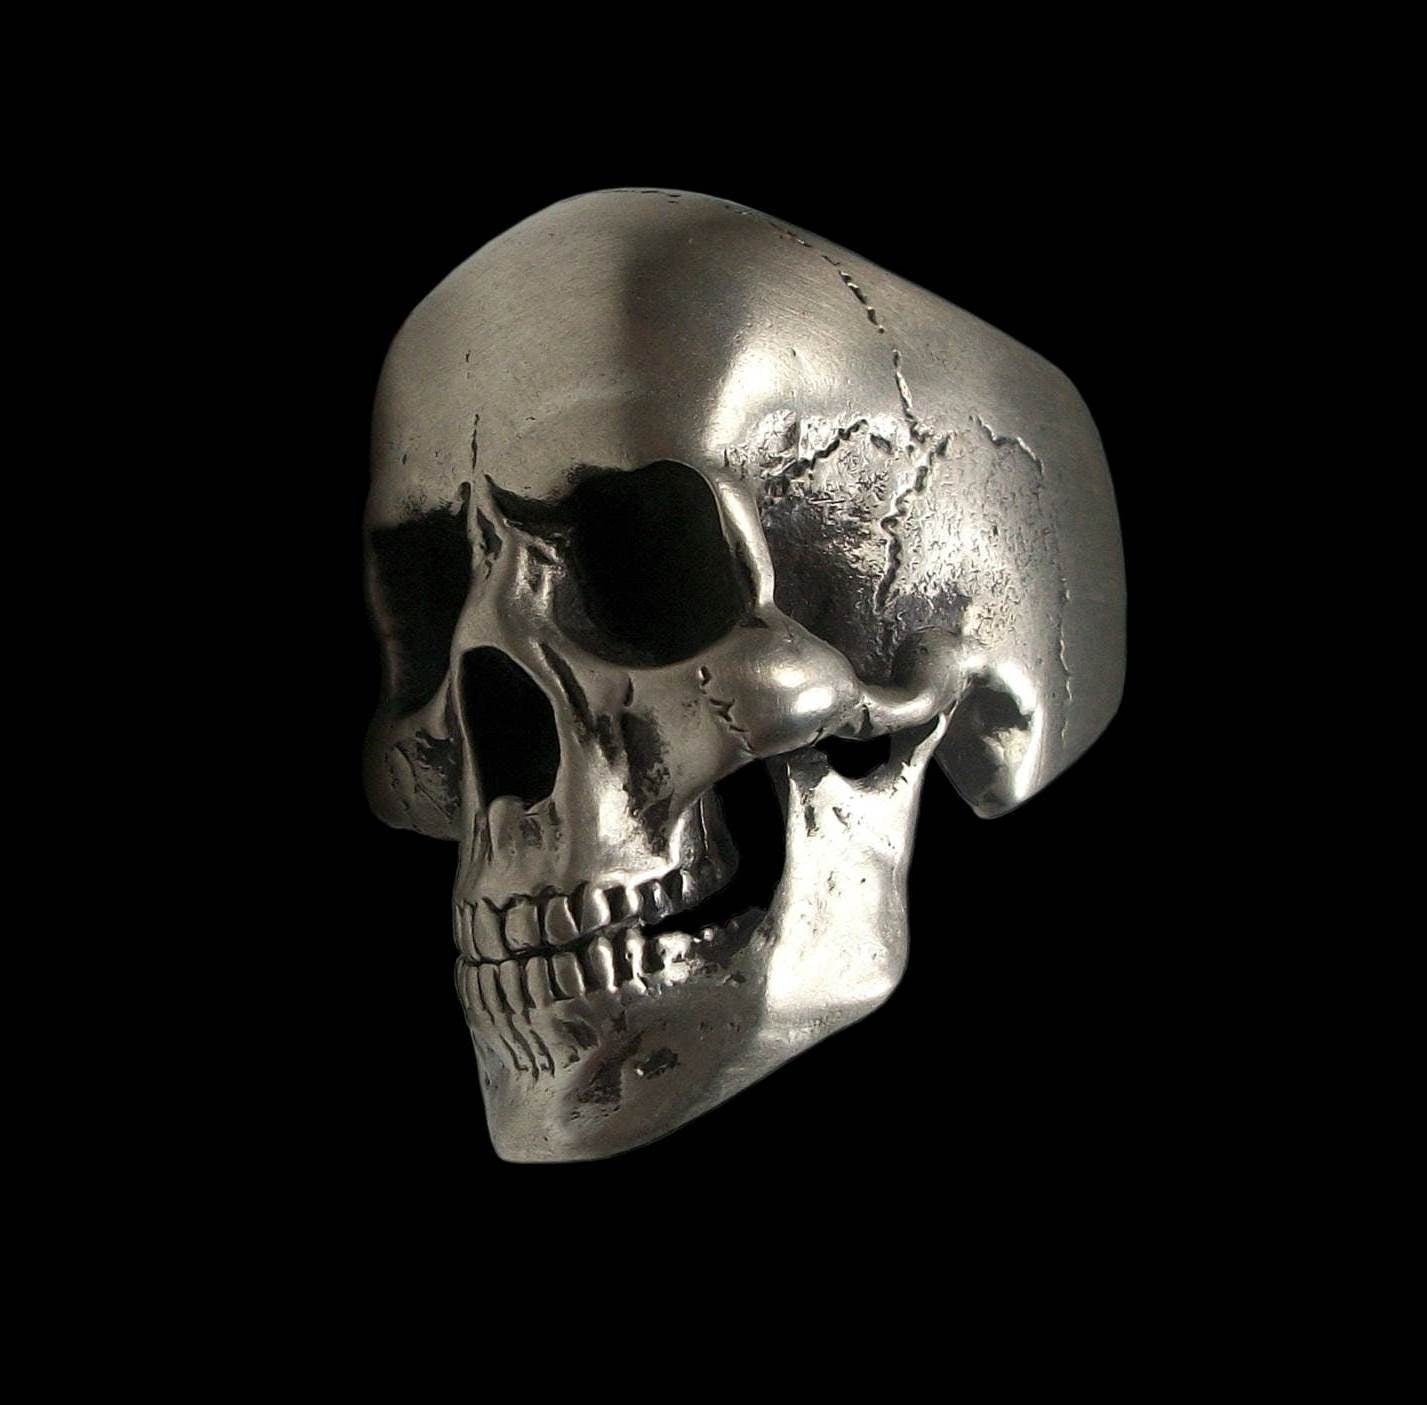 Skull ring - Sterling Silver Anatomical Skull Ring with Jaw